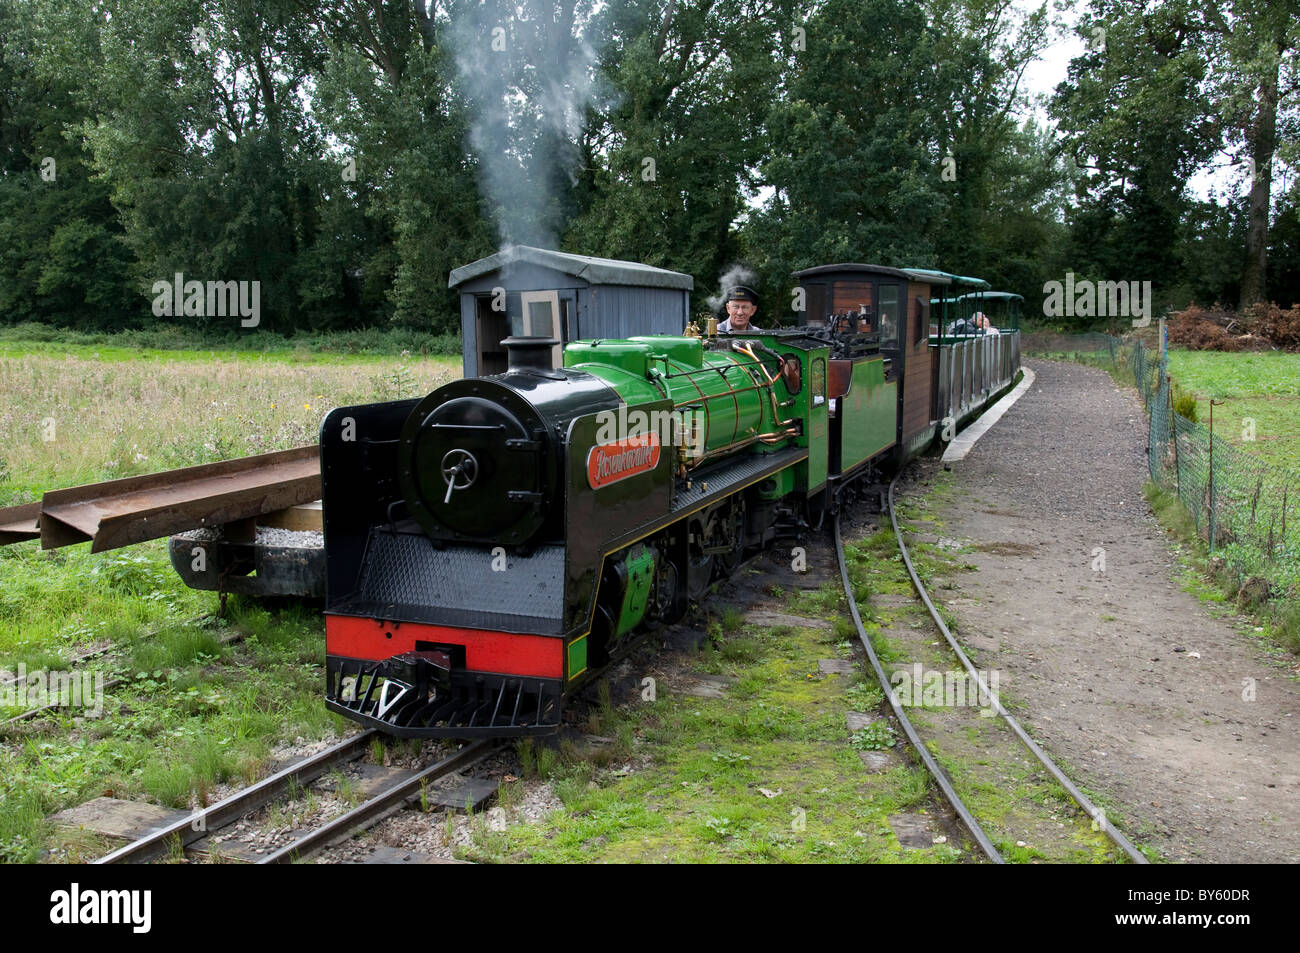 German-made small-scale steam locomotive at Bressingham Steam Museum in Norfolk, England. Stock Photo